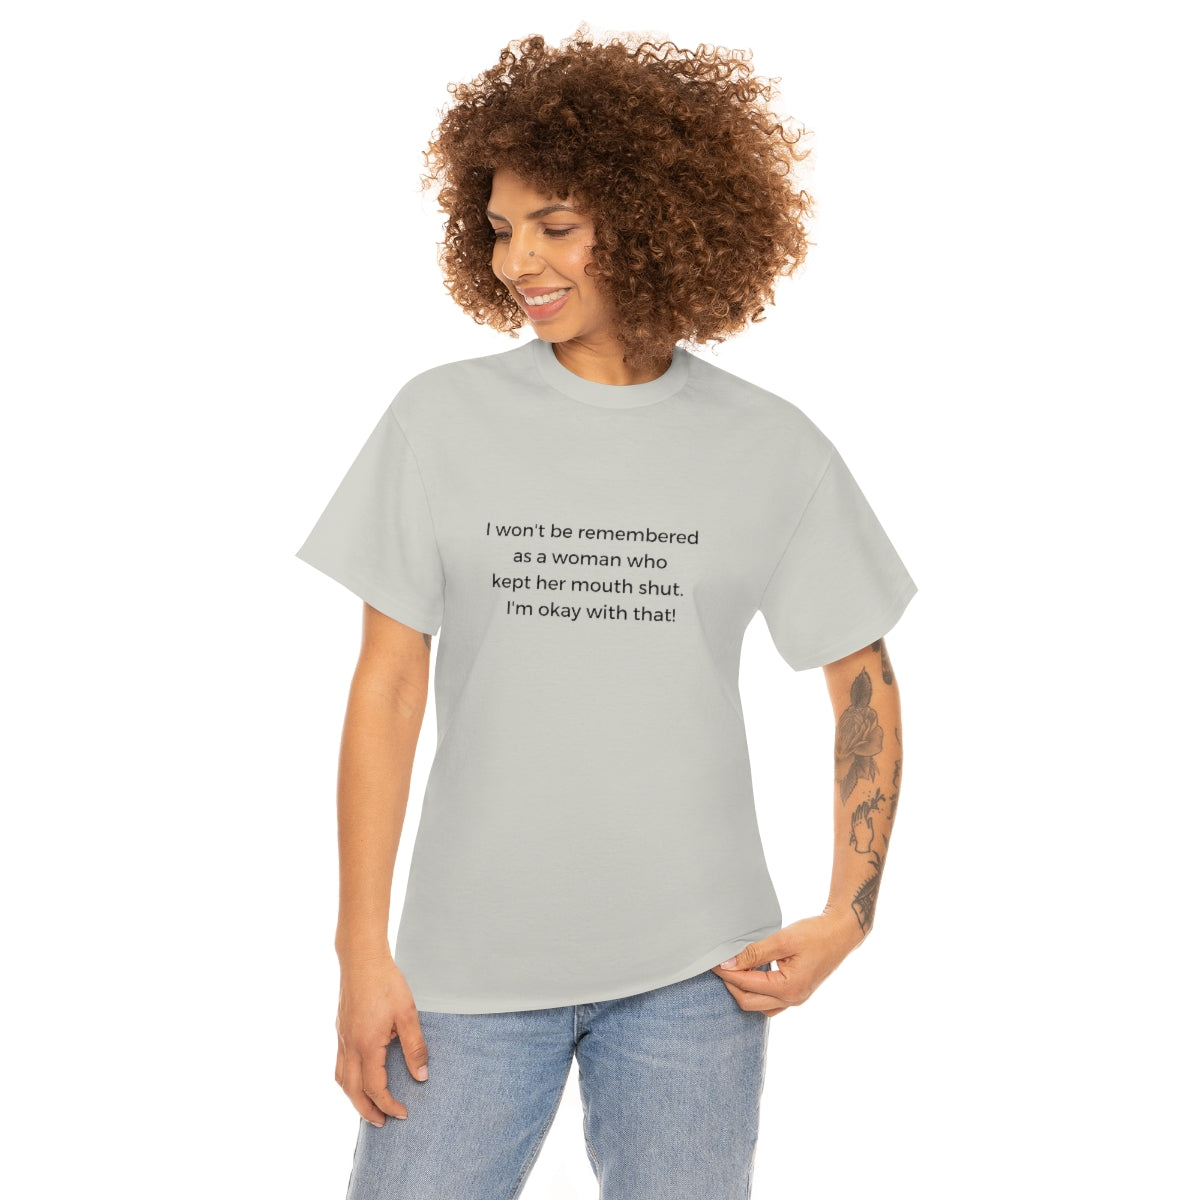 Funny Feminist Shirt, I Won't Be Remembered As A Woman Who Kept Her Mouth Shut, Wonder Woman, Pioneer Woman,  Funny Tshirt, Funny Womens Tee - The Good Life Vibe